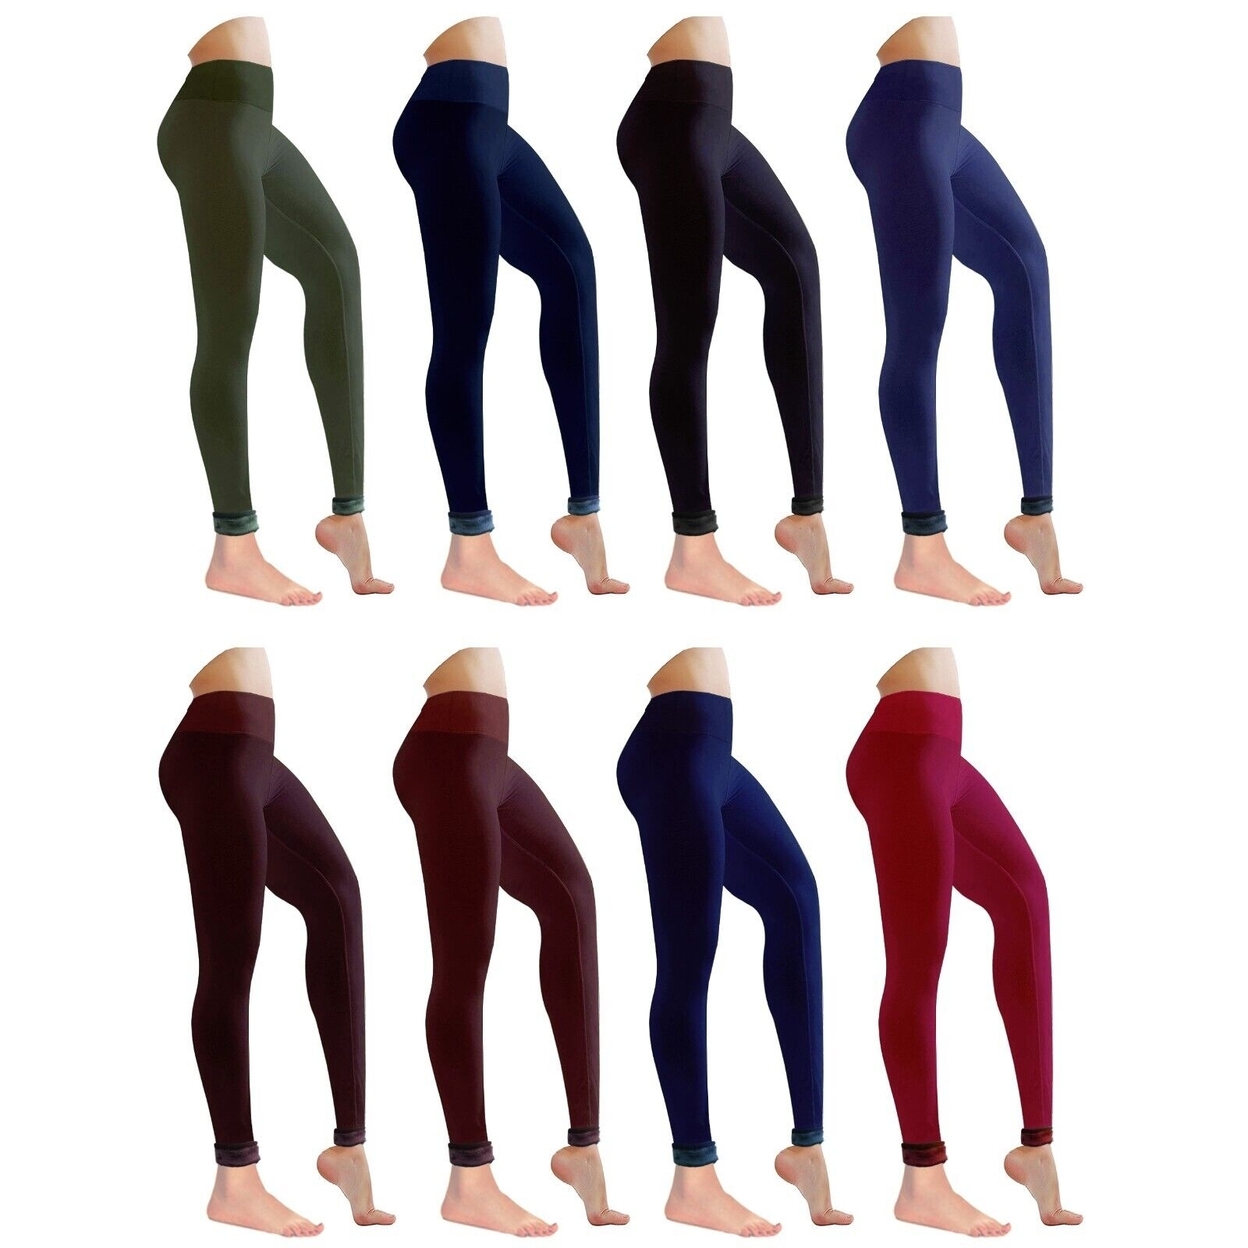 Multi-Pack: Women's Winter Warm Ultra Soft Cozy Fur Lined Leggings - Assorted, 1-pack, Large